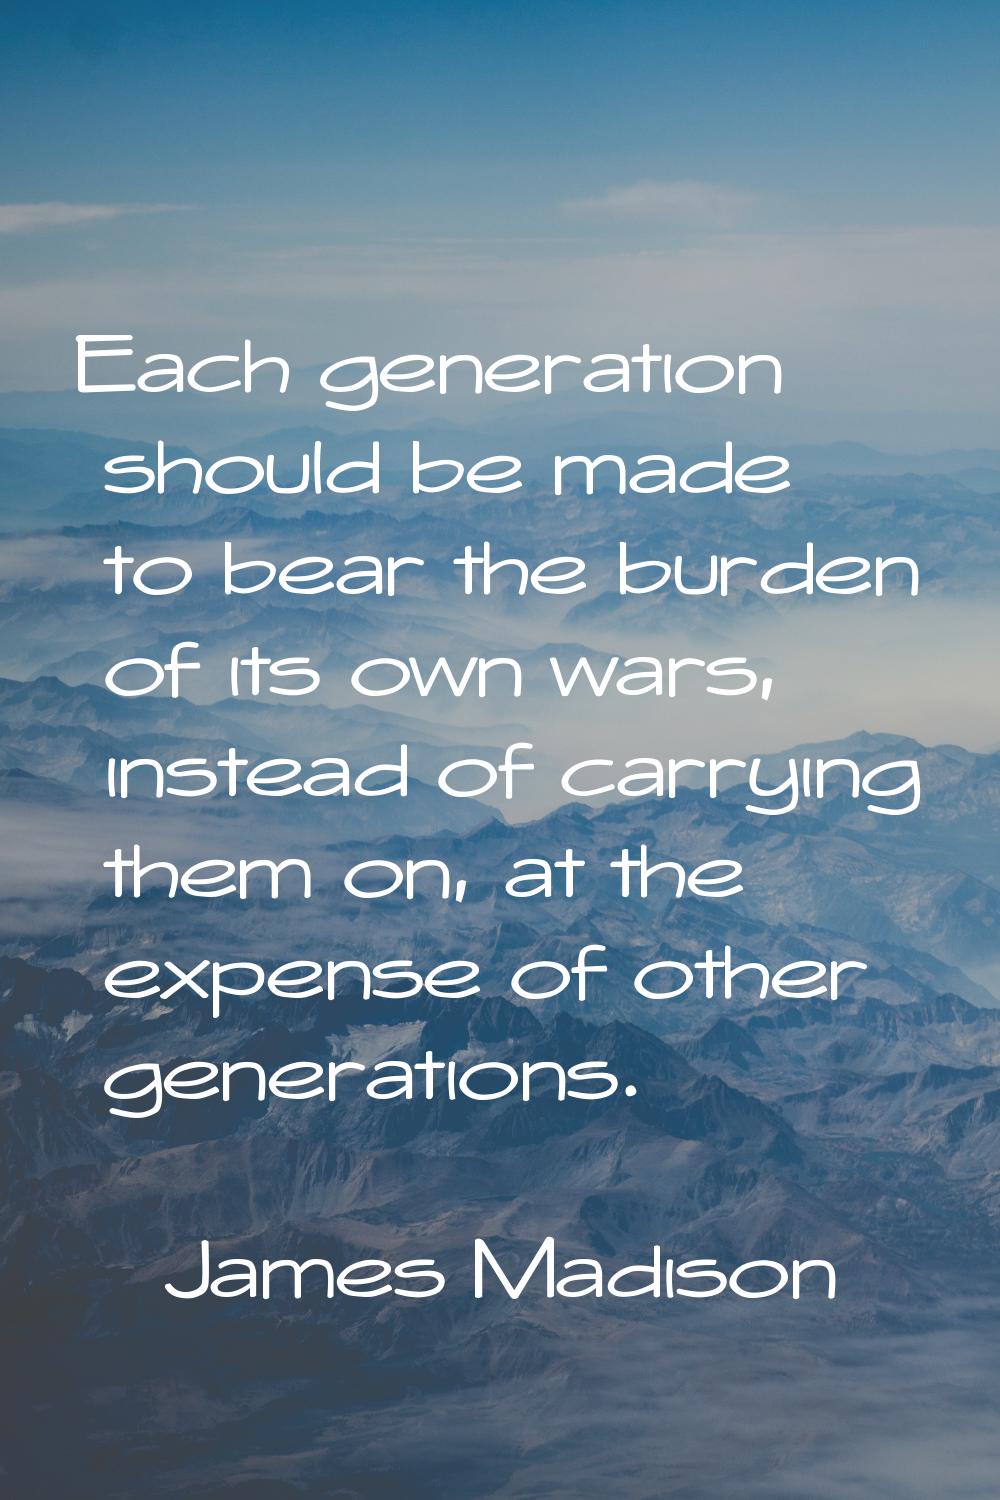 Each generation should be made to bear the burden of its own wars, instead of carrying them on, at 